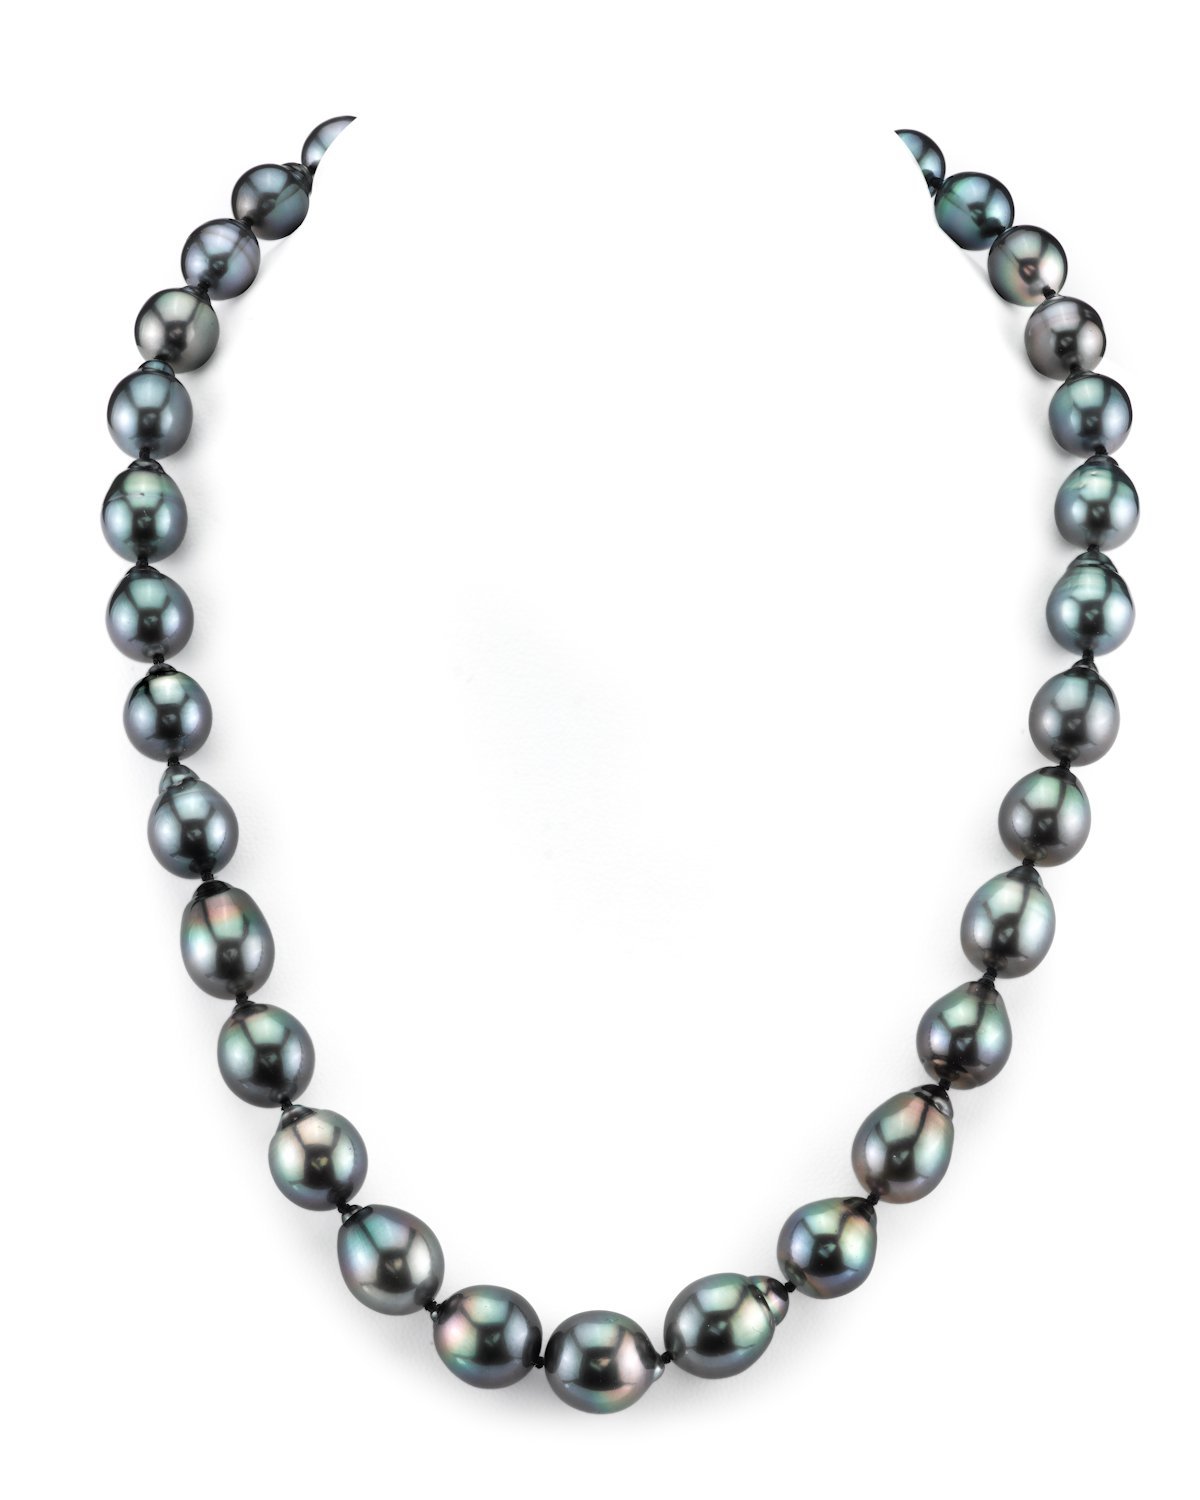 LBN5000 LONG BEADED NECKLACE 